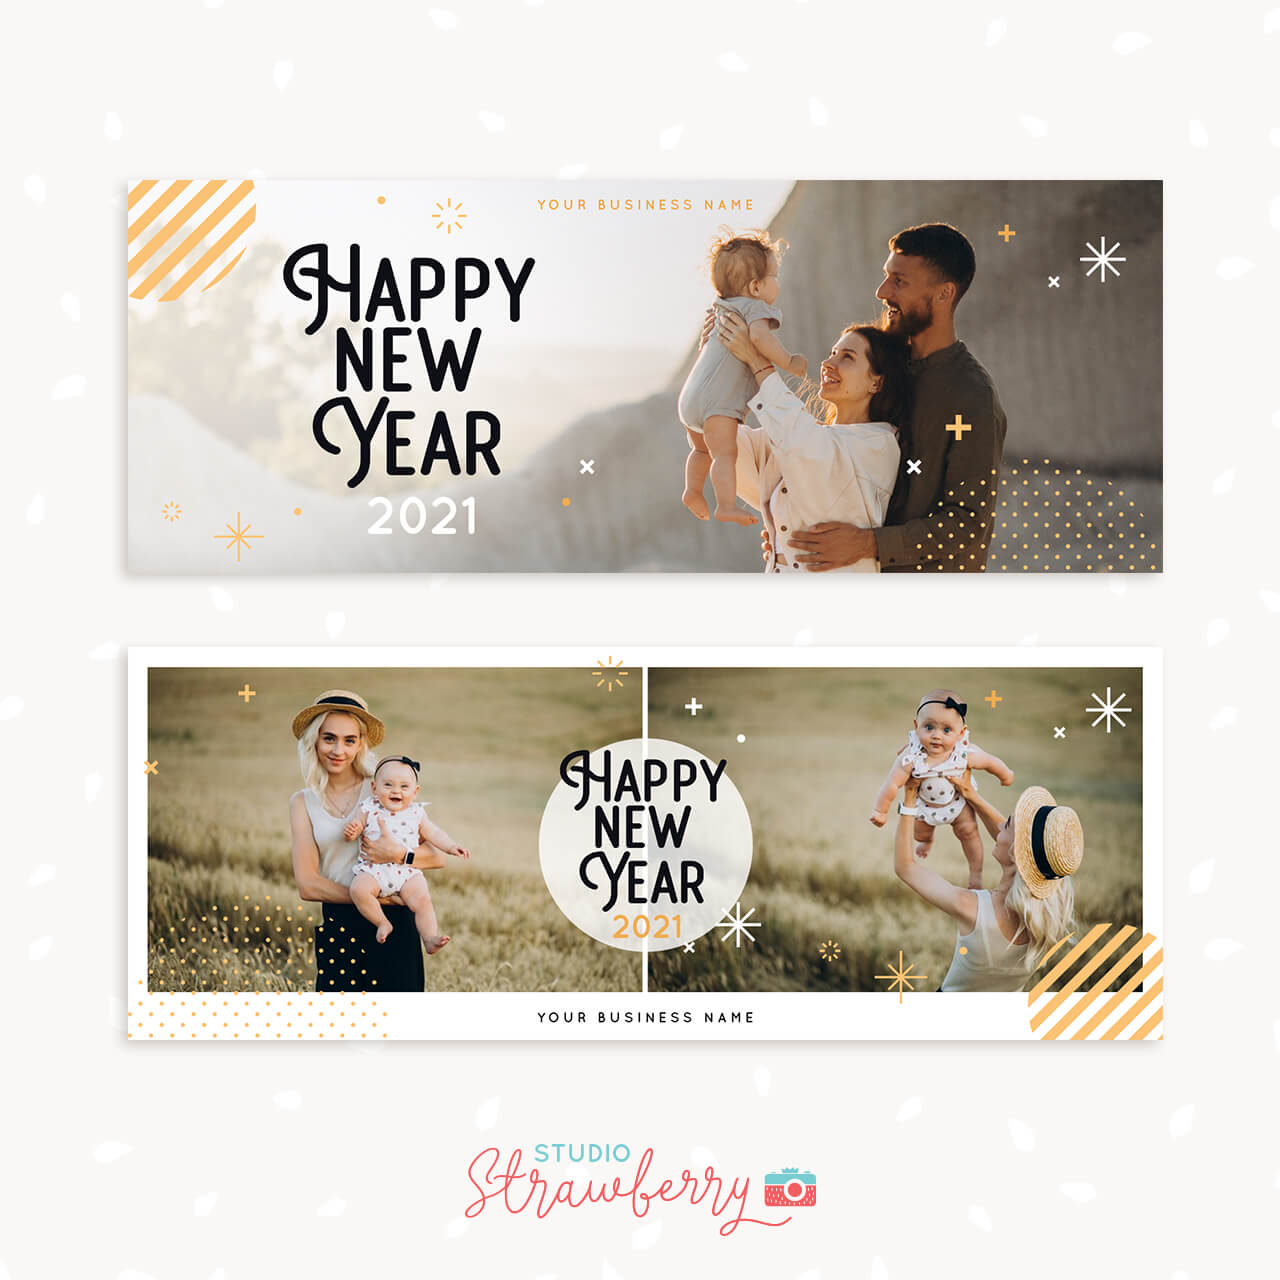 Happy New Year Facebook Cover Template